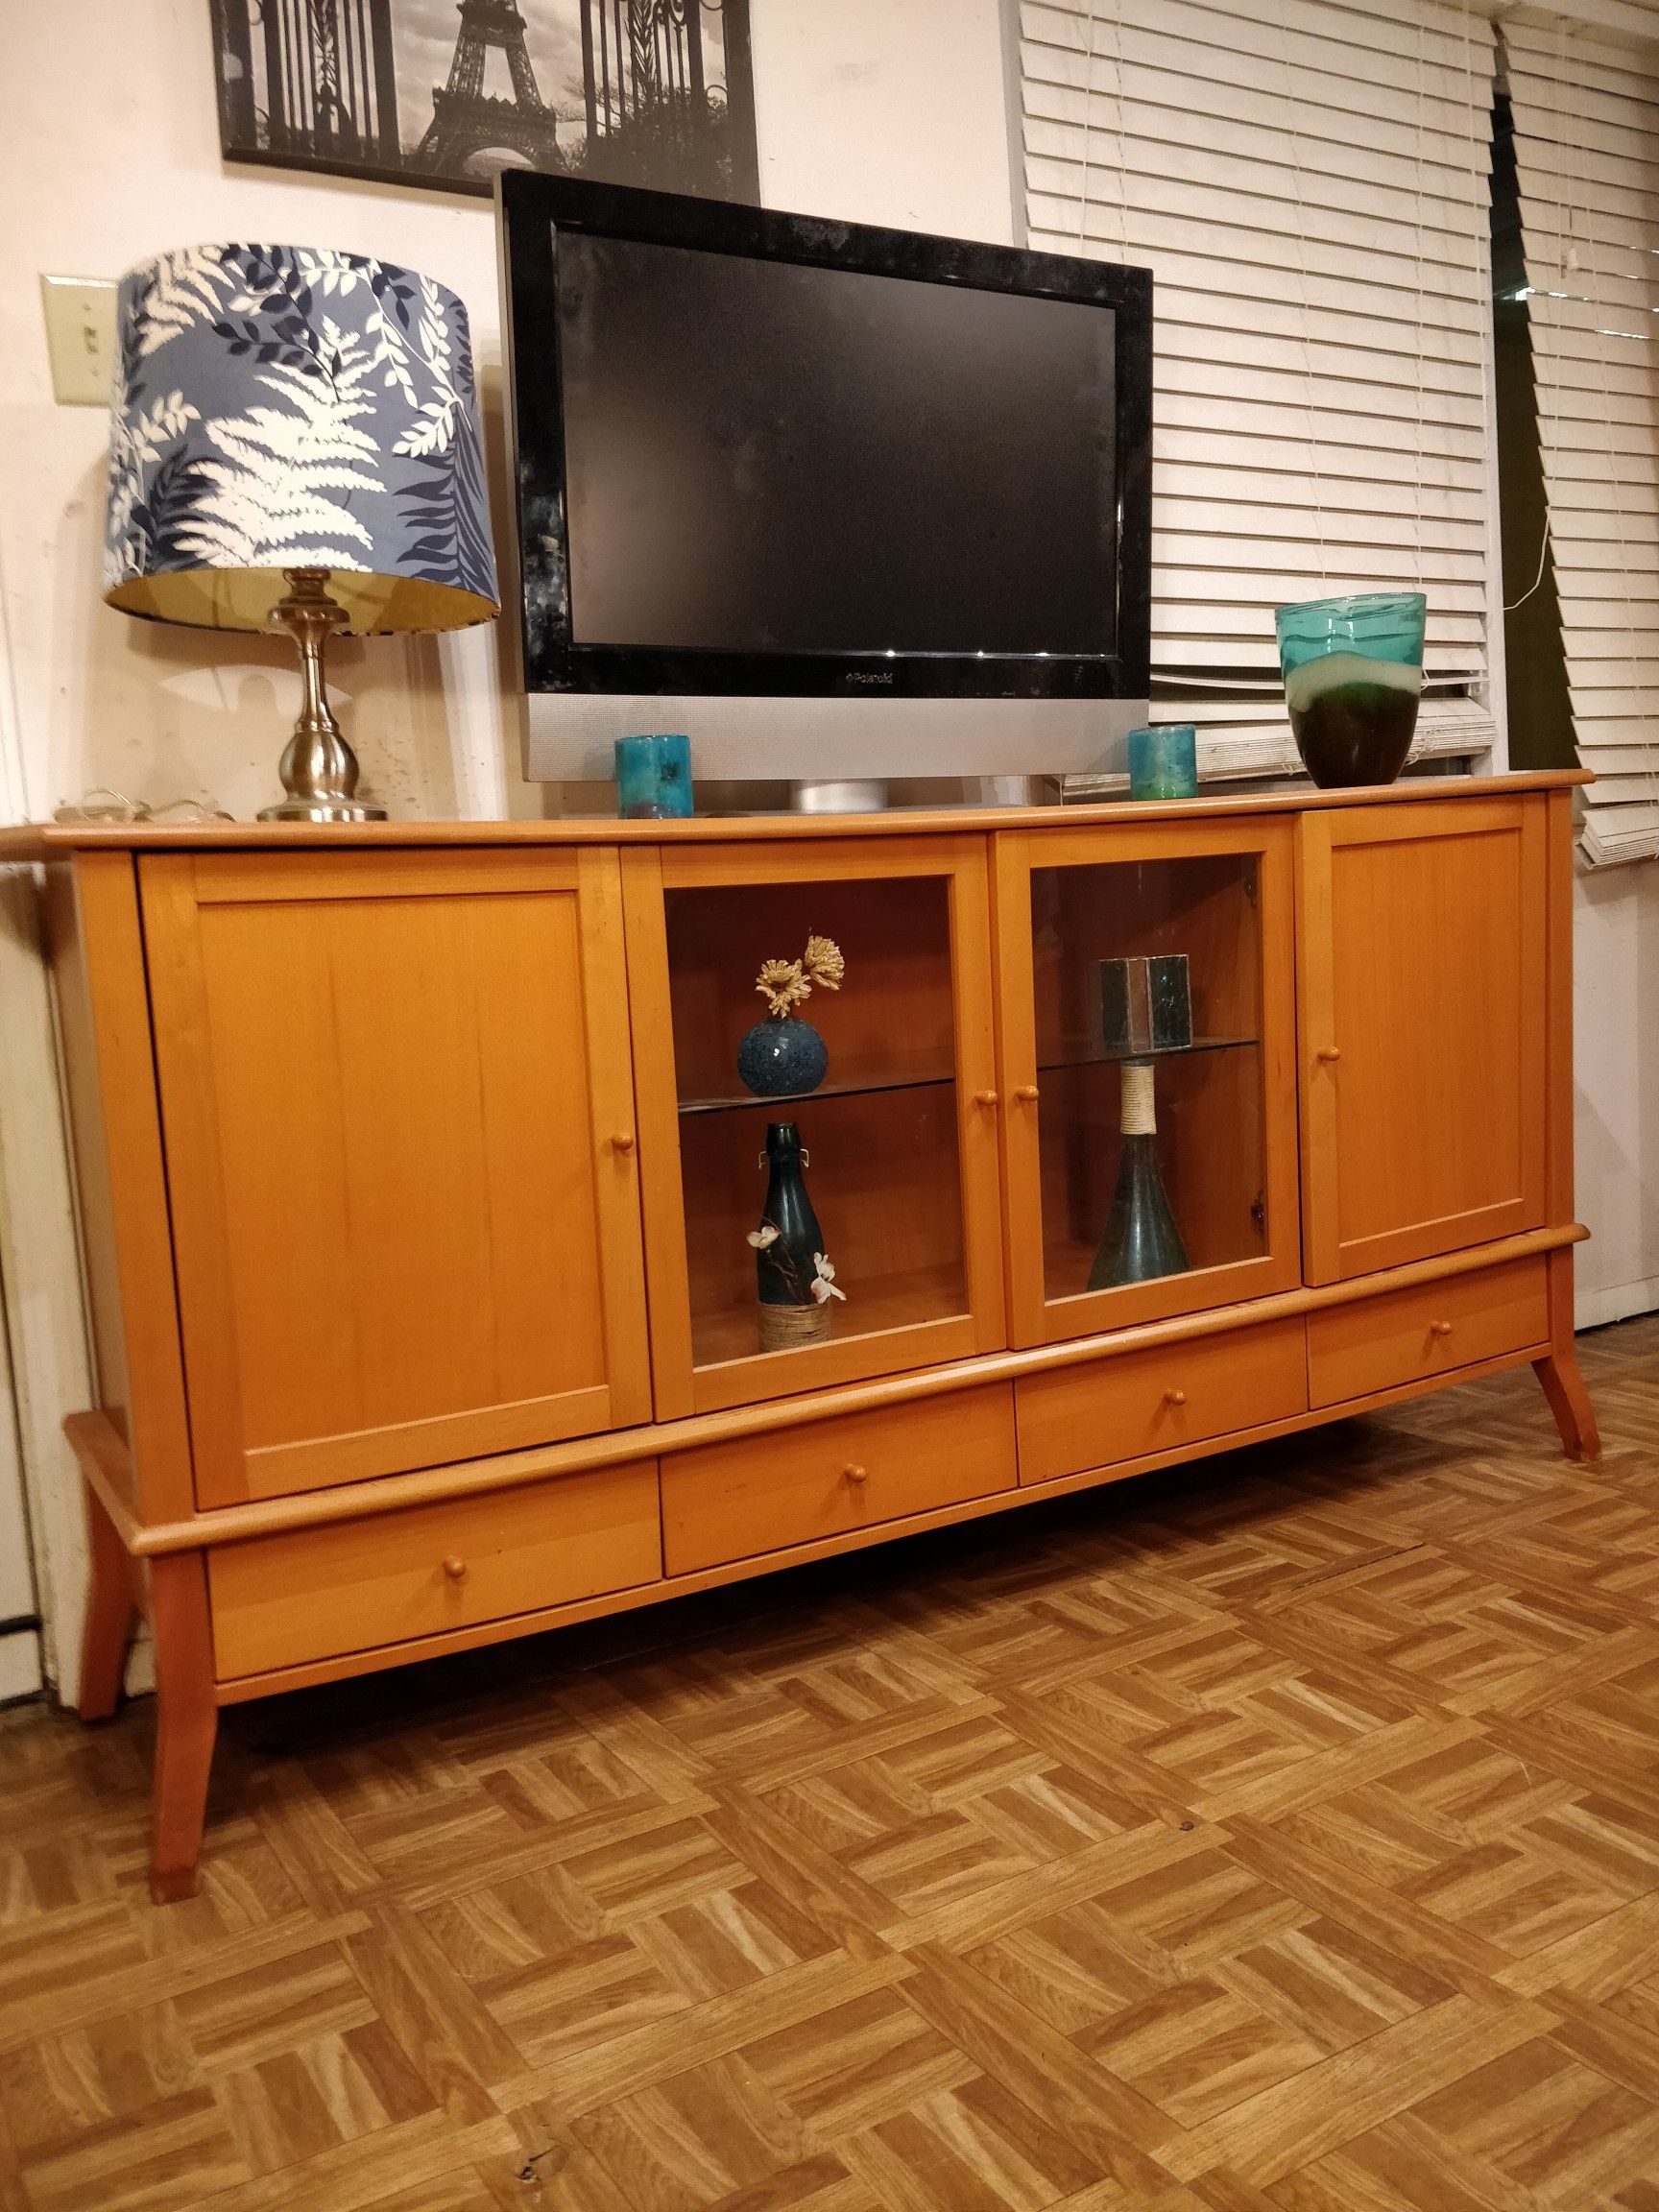 Nice wooden buffet/ TV stand for big TVs with 4 drawers, cabinets and glass shelves in very good condition, all